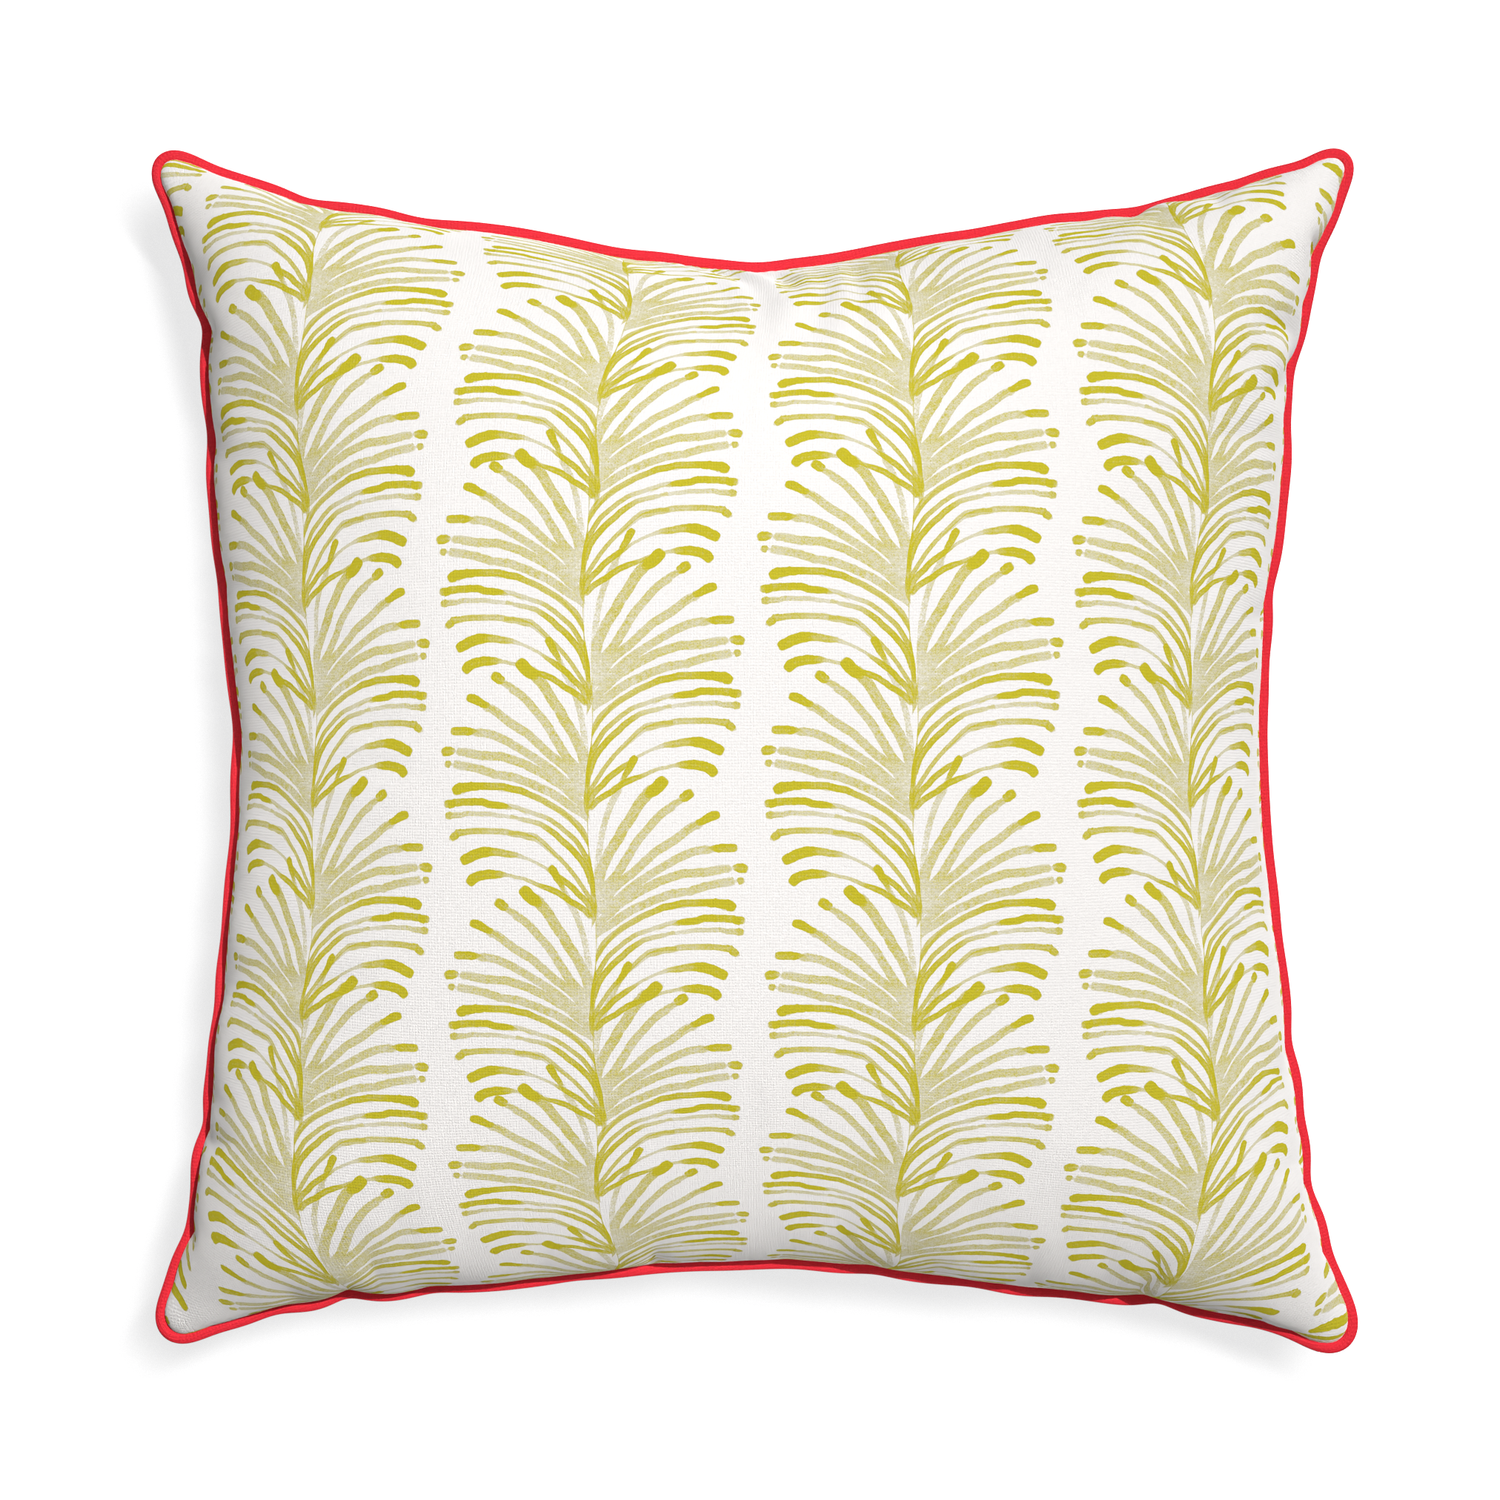 Euro-sham emma chartreuse custom yellow stripe chartreusepillow with cherry piping on white background